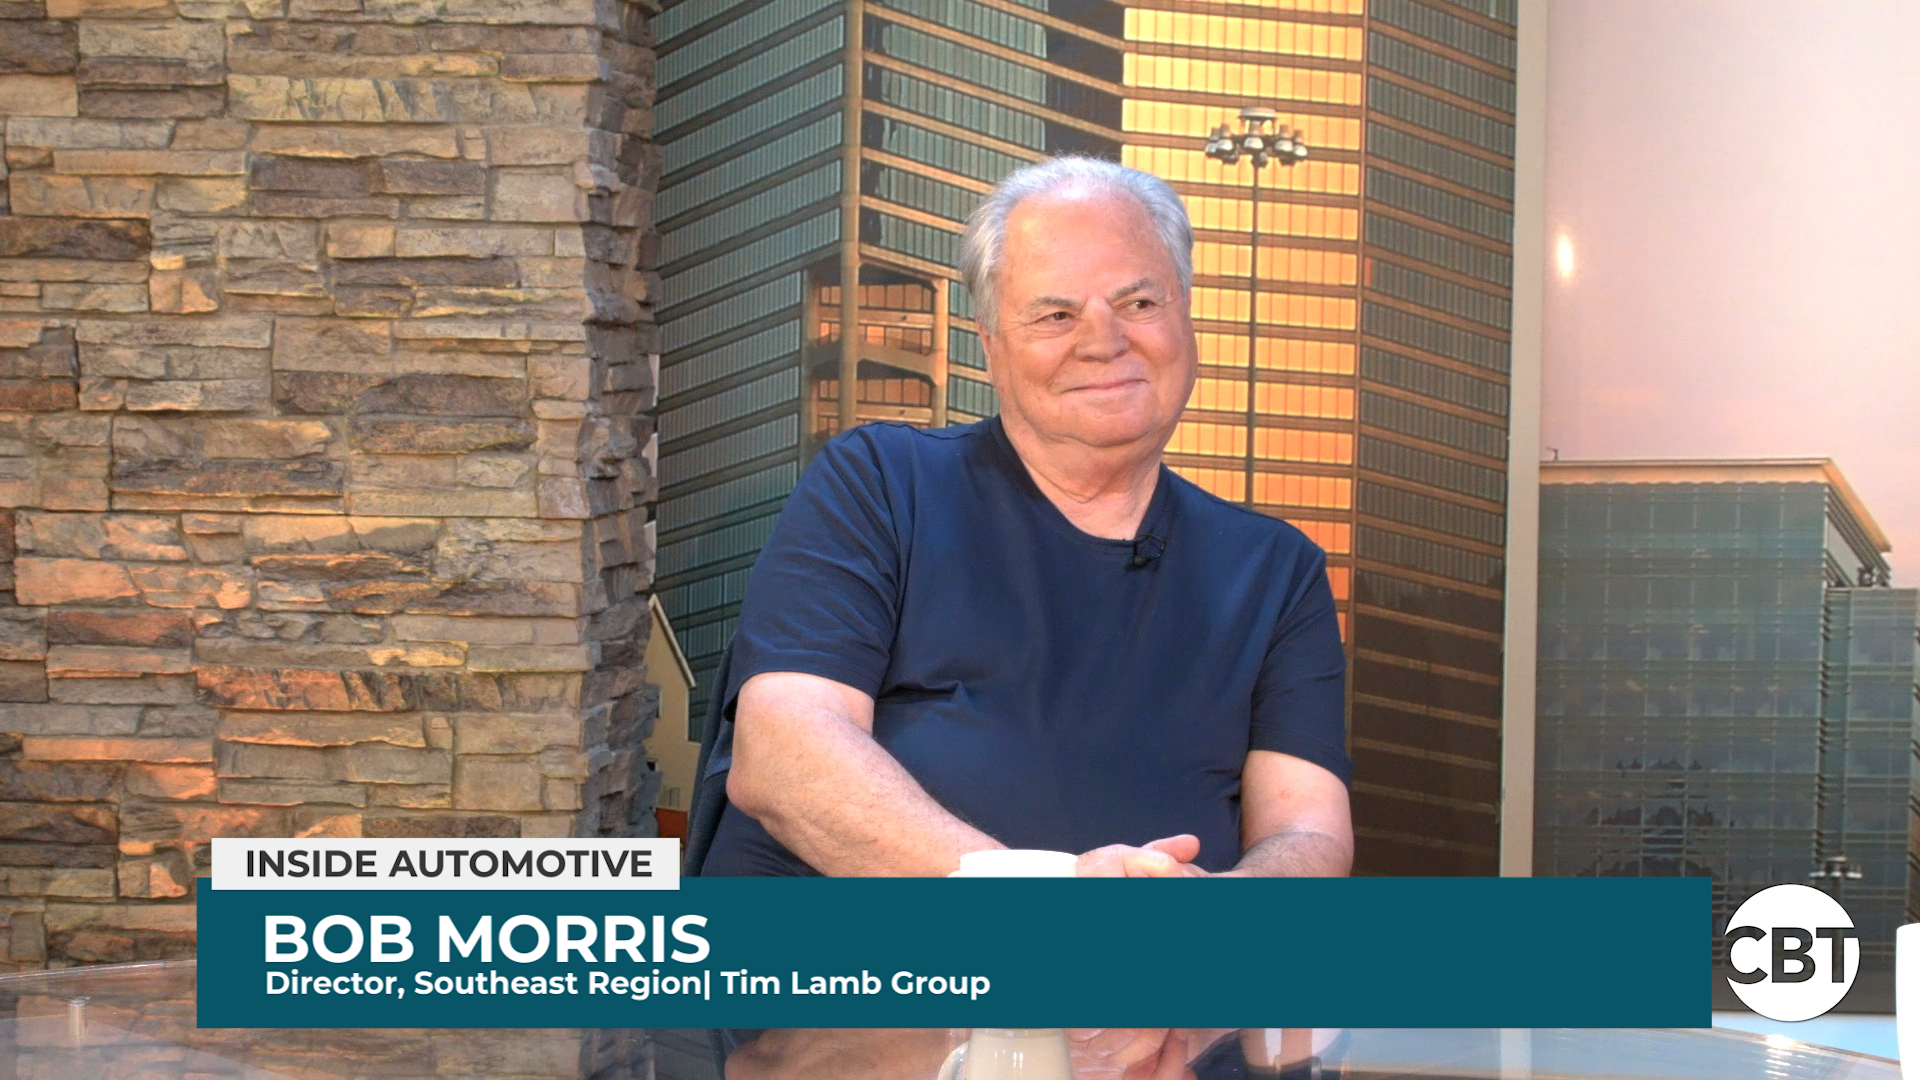 Bob Morris joins Inside Automotive to discuss a new EV brand titled ARRA, which aims to leverage franchised dealers in the U.S.